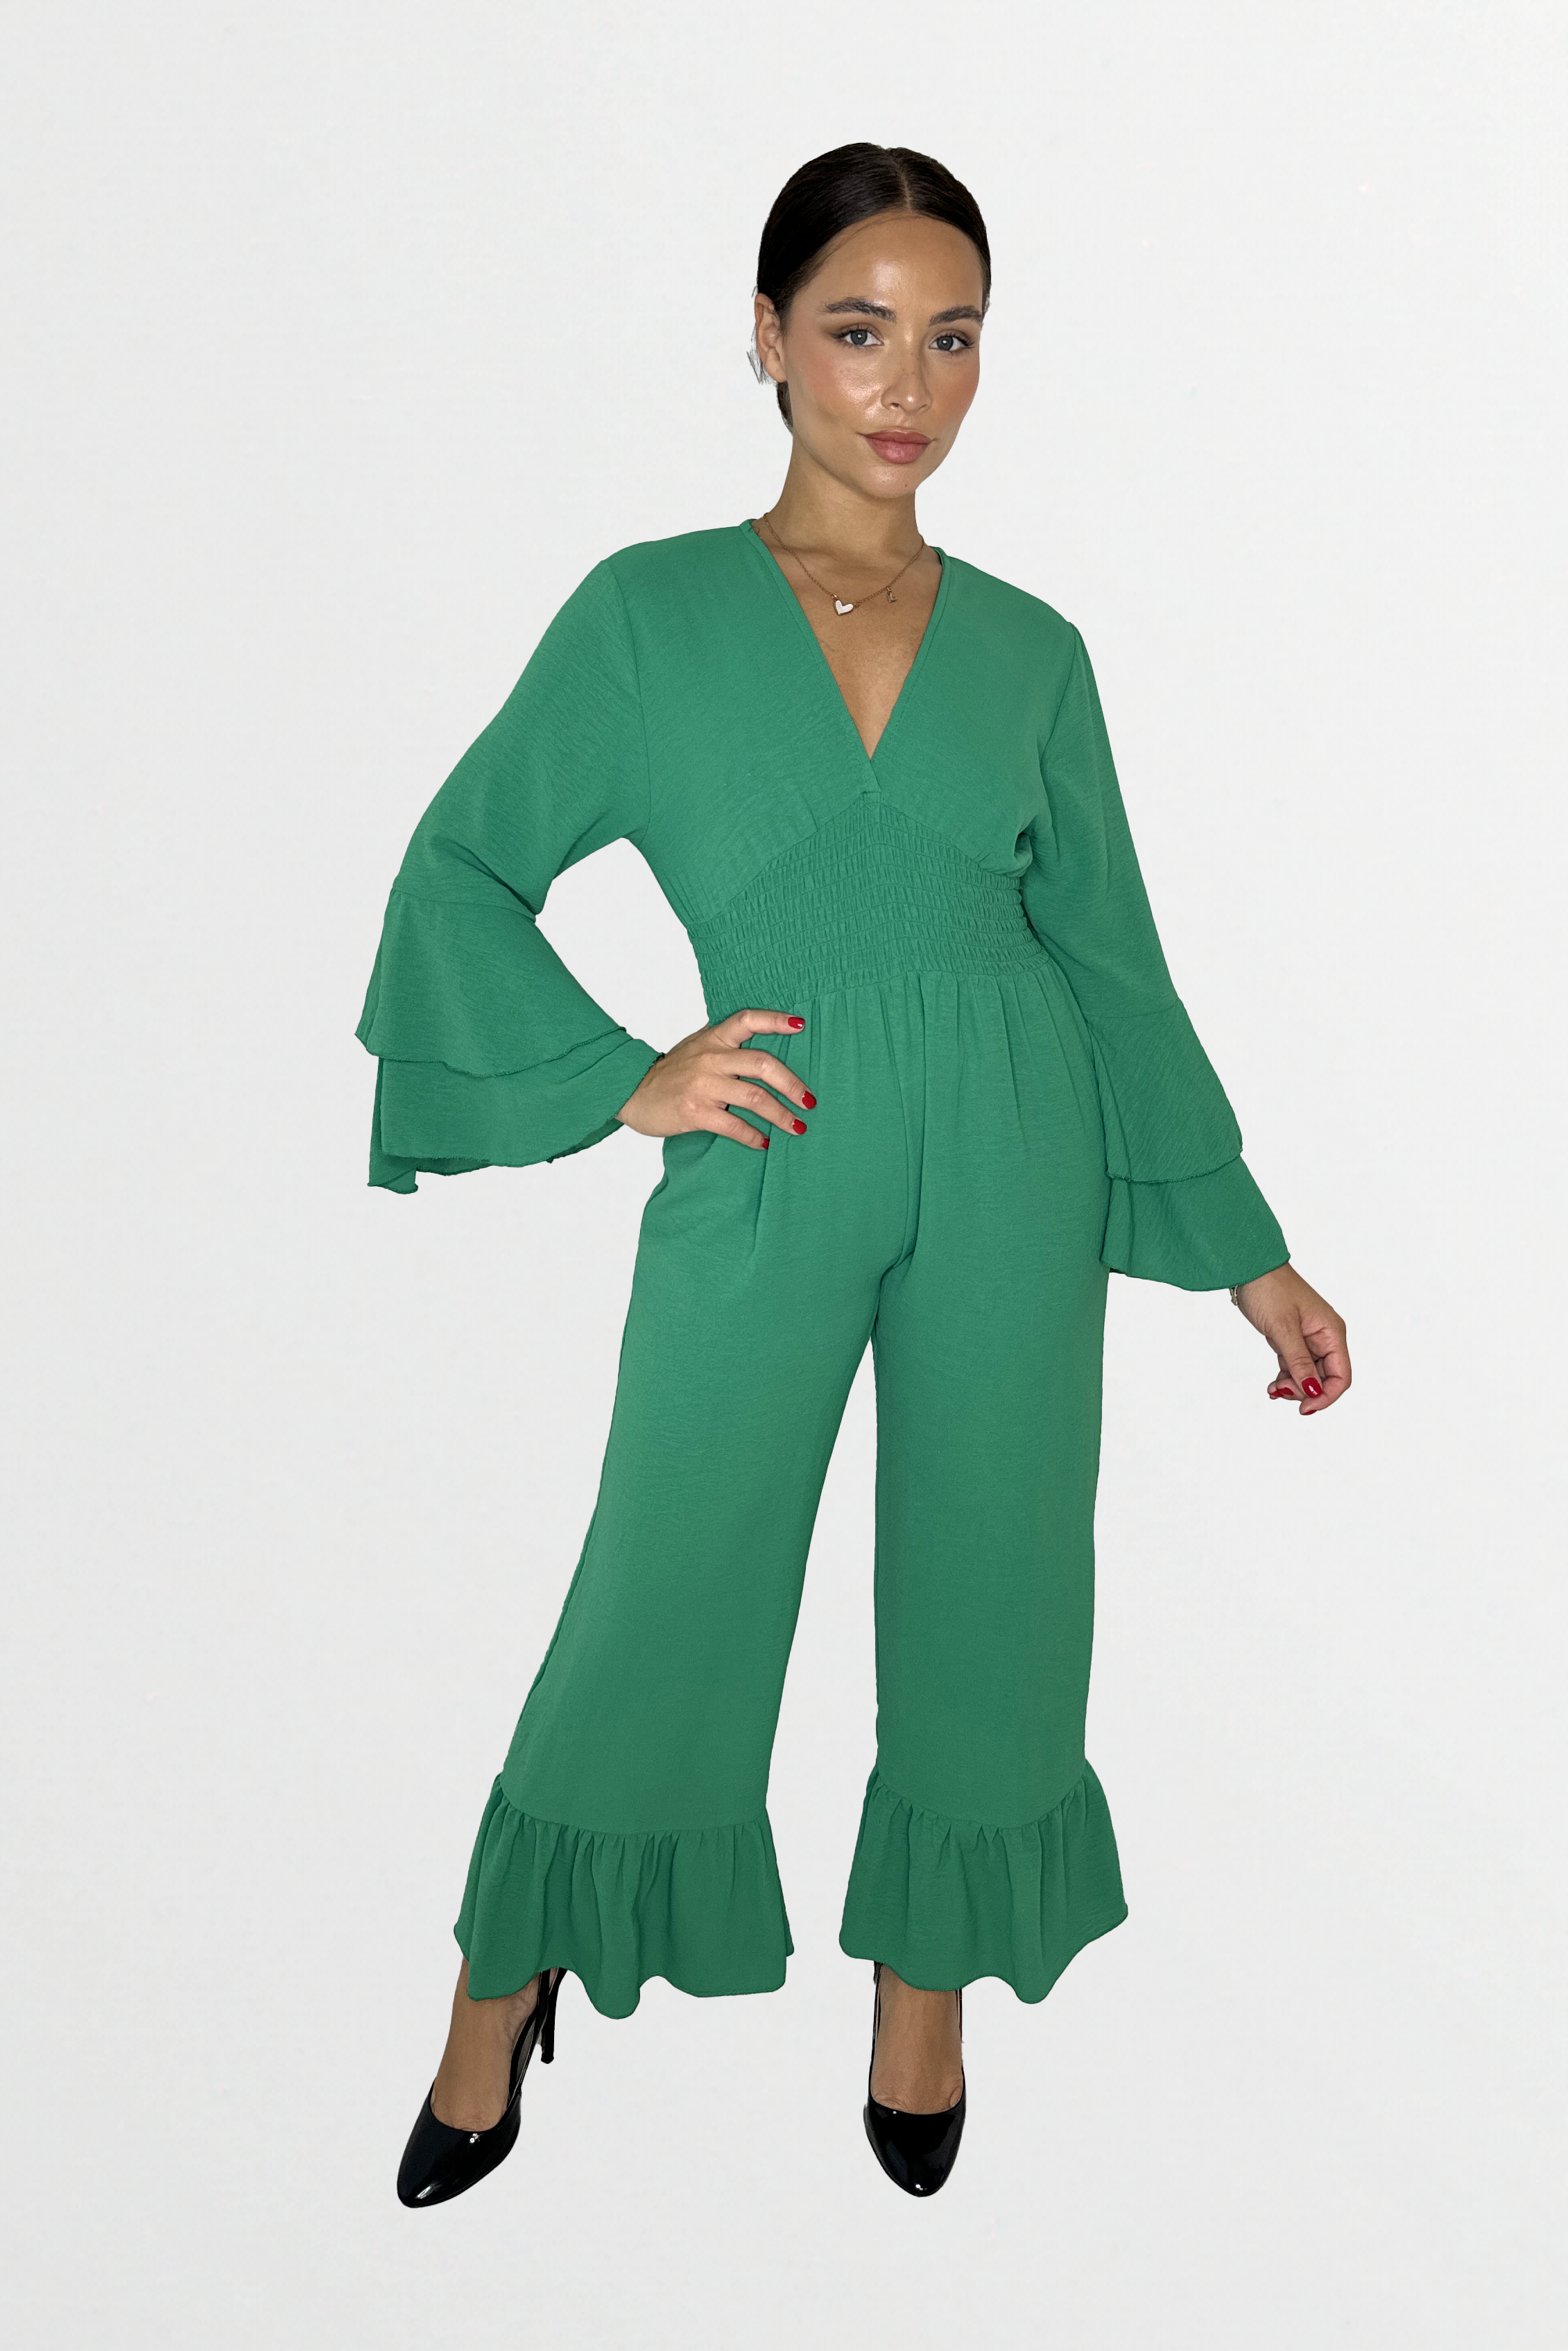 Low V-Cut Neck Bell Sleeve Cinched Waist Frill Wide Leg Petite Jumpsuit-SinglePrice